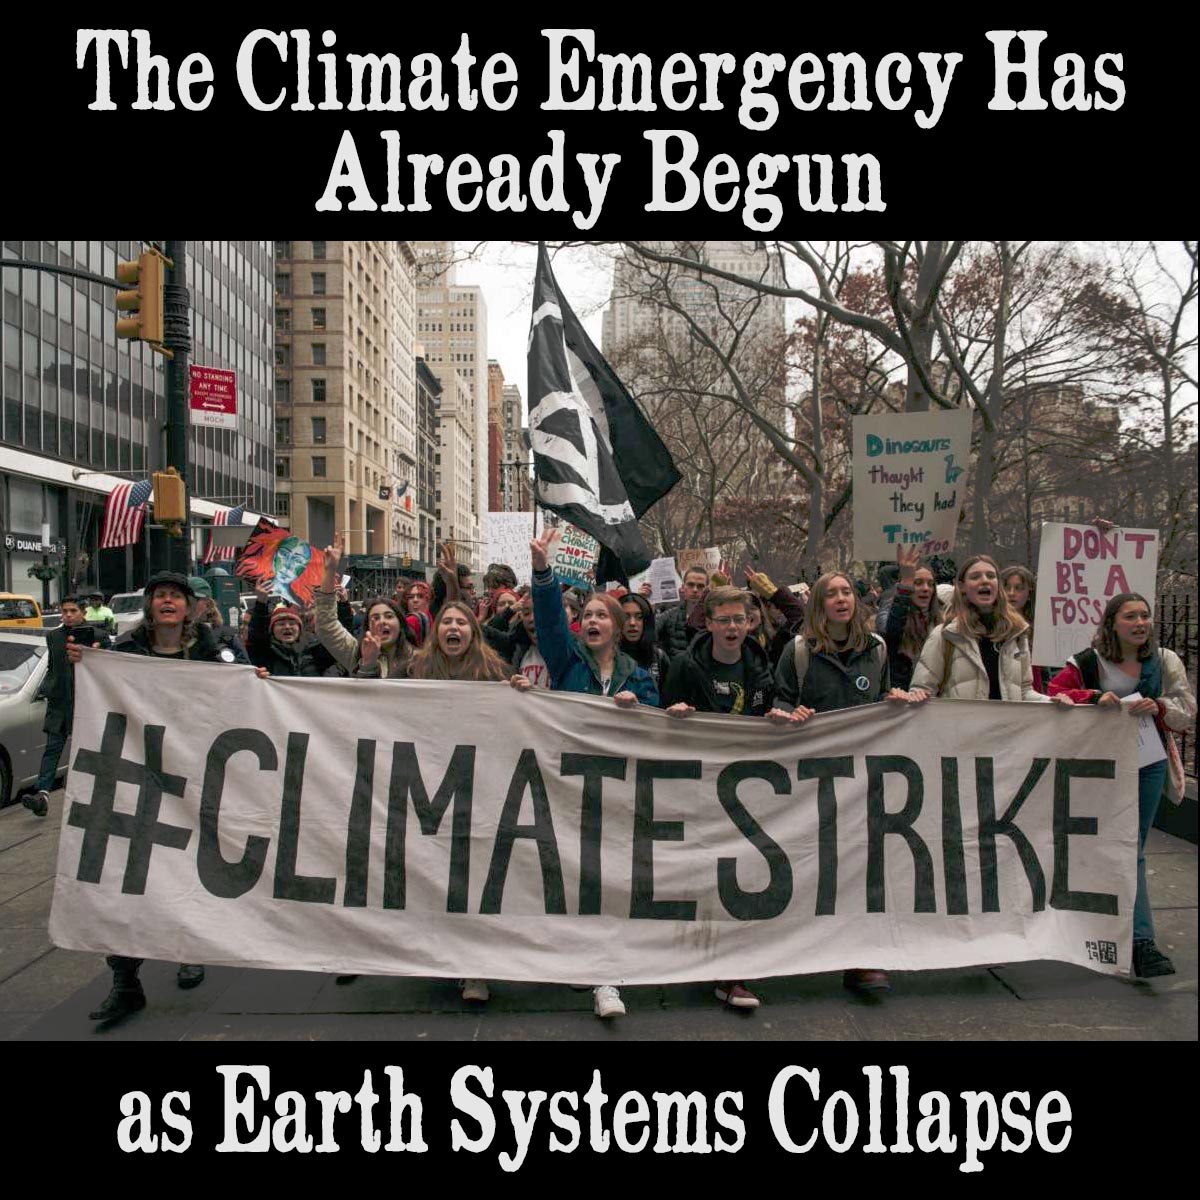 The Climate Emergency Has Already Begun as Earth Systems Collapse